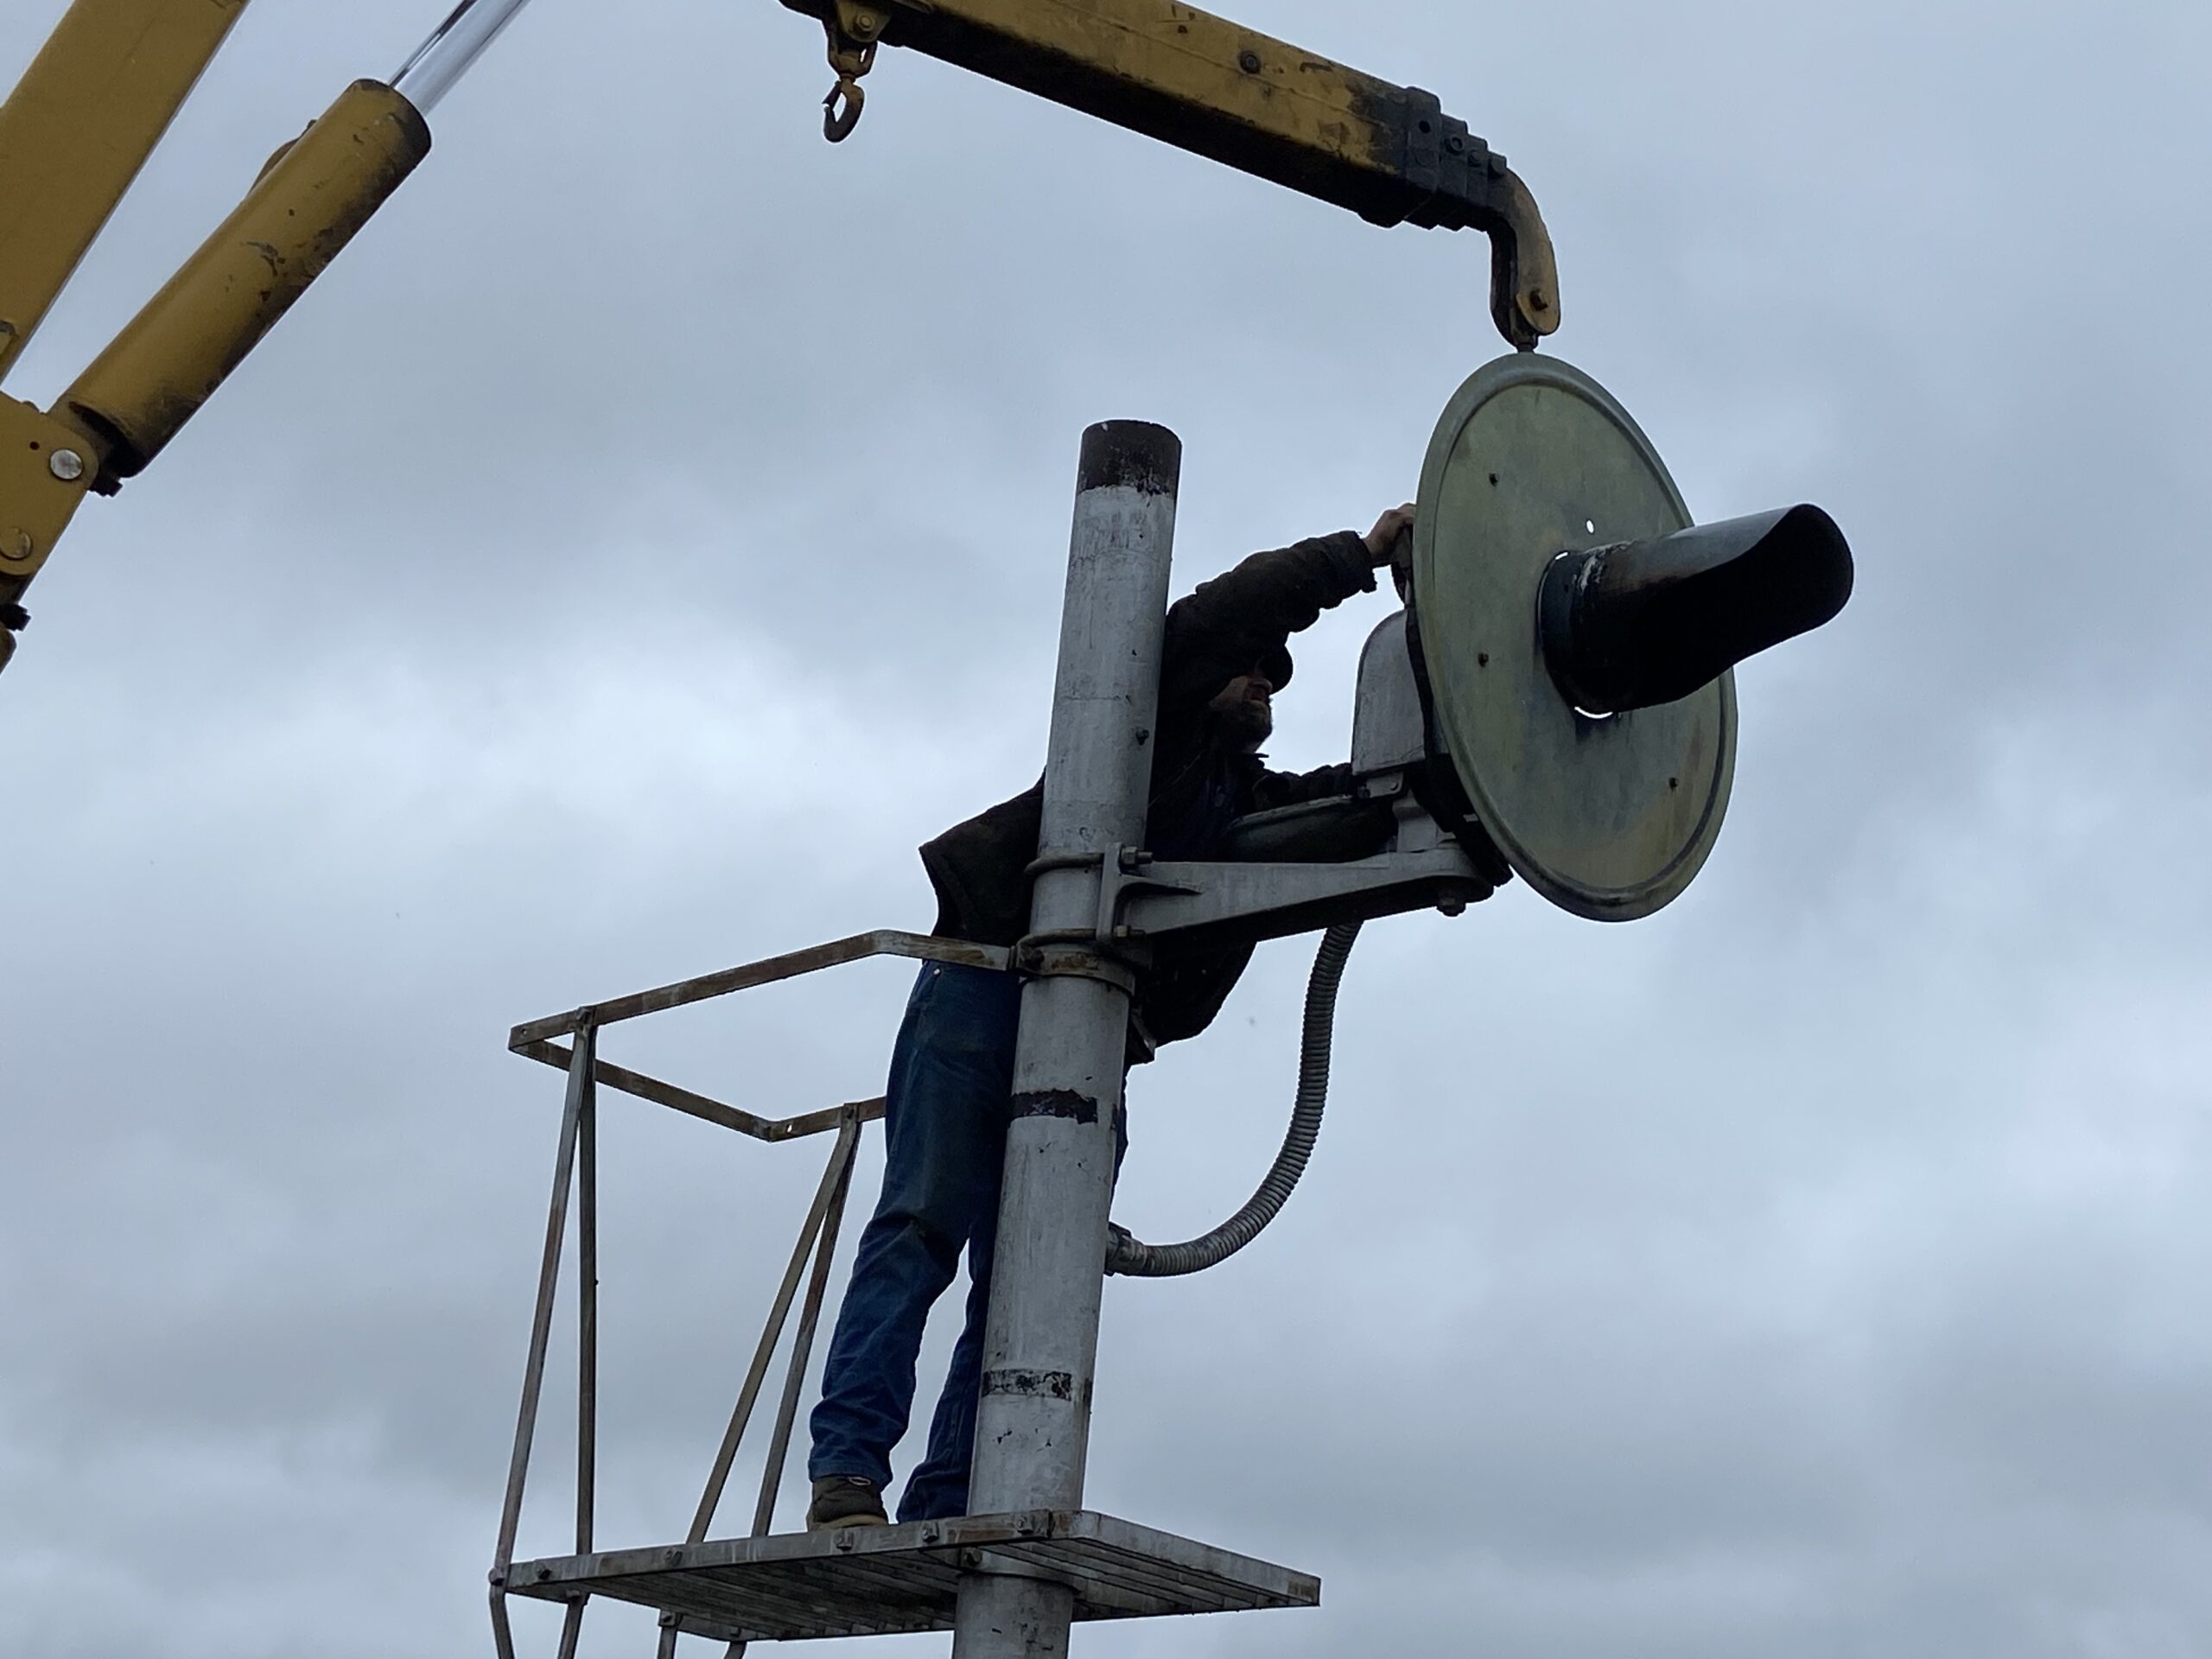 A volunteer unfastens the signal head from the mast.